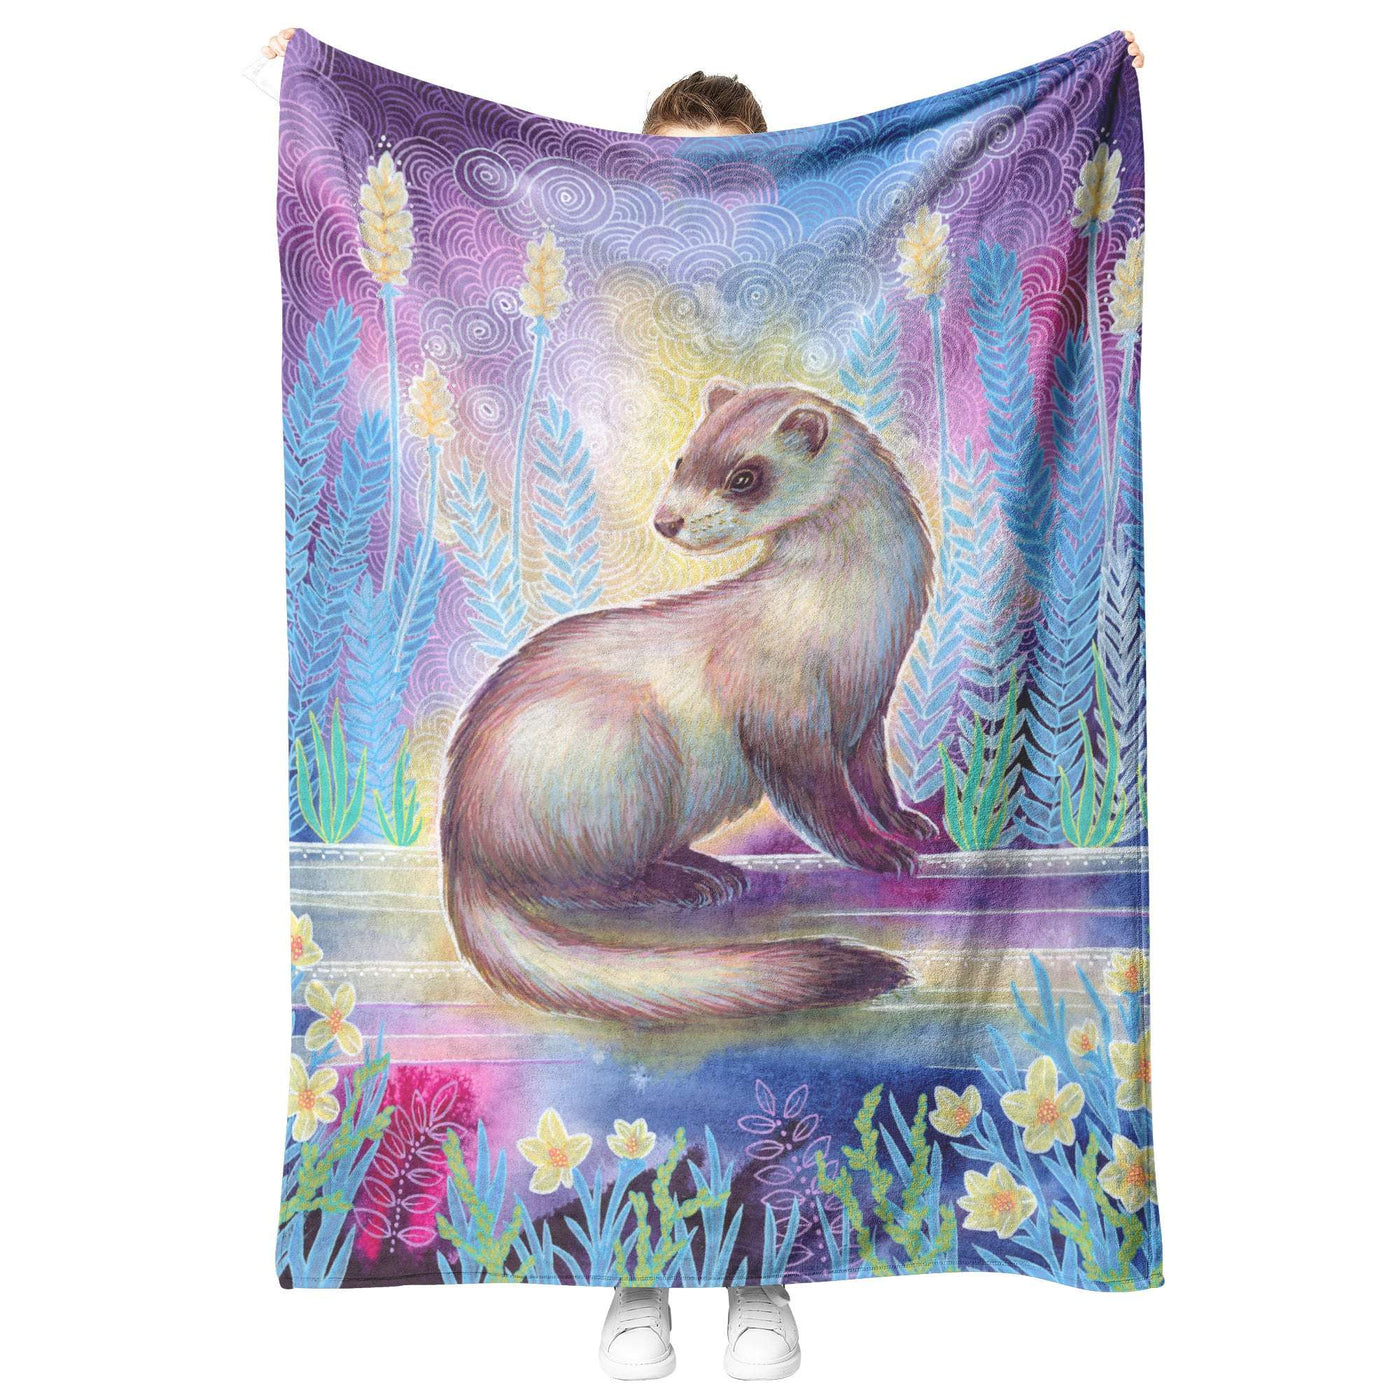 A person holding up a Ferret Blanket featuring a colorful illustration of a ferret surrounded by vibrant, stylized floral patterns.